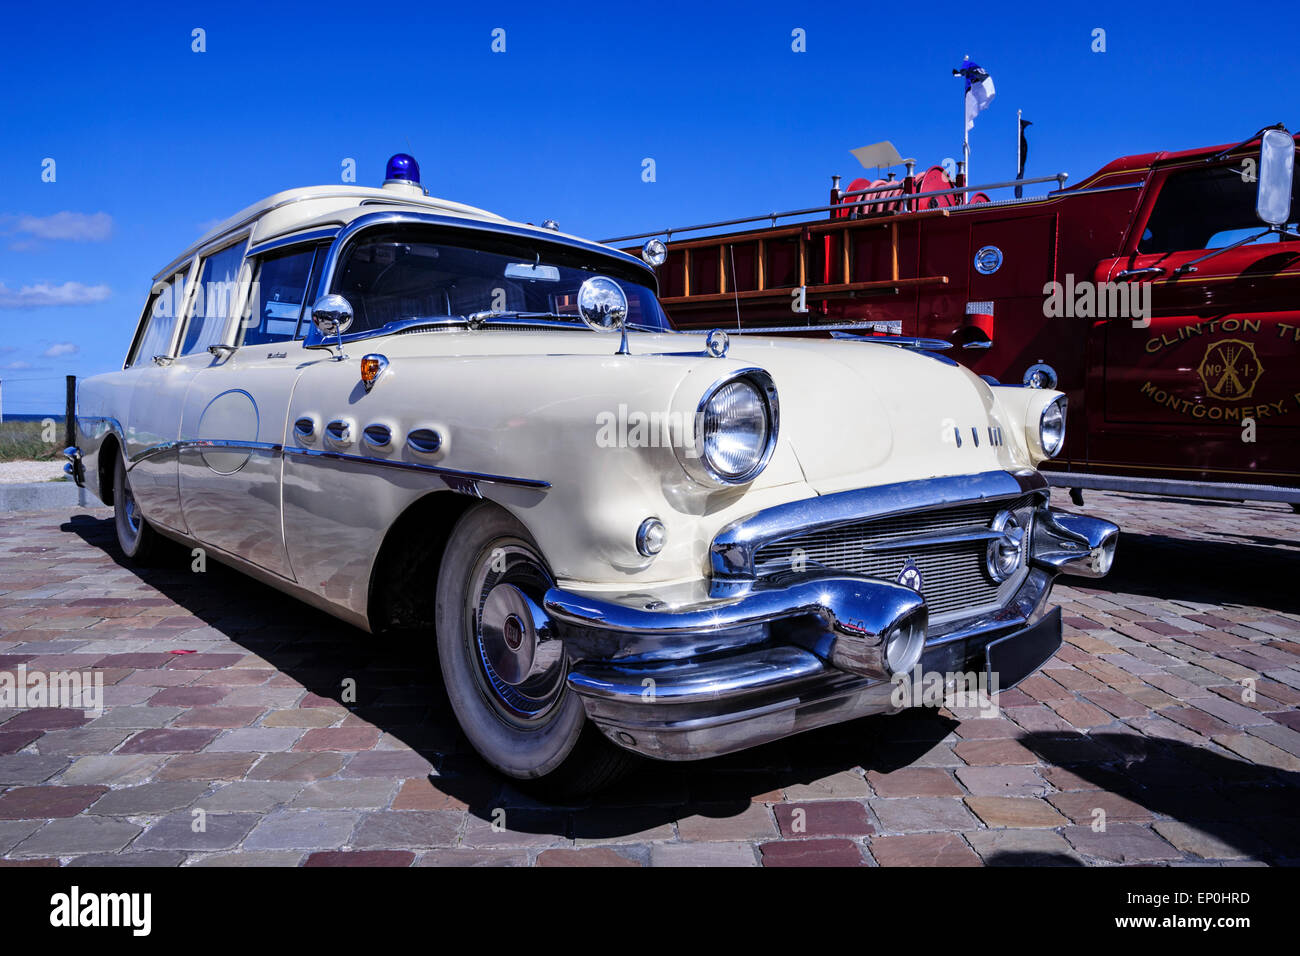 1956 Buick Roadmaster Ambulance on display at classic cars exhibition Stock Photo